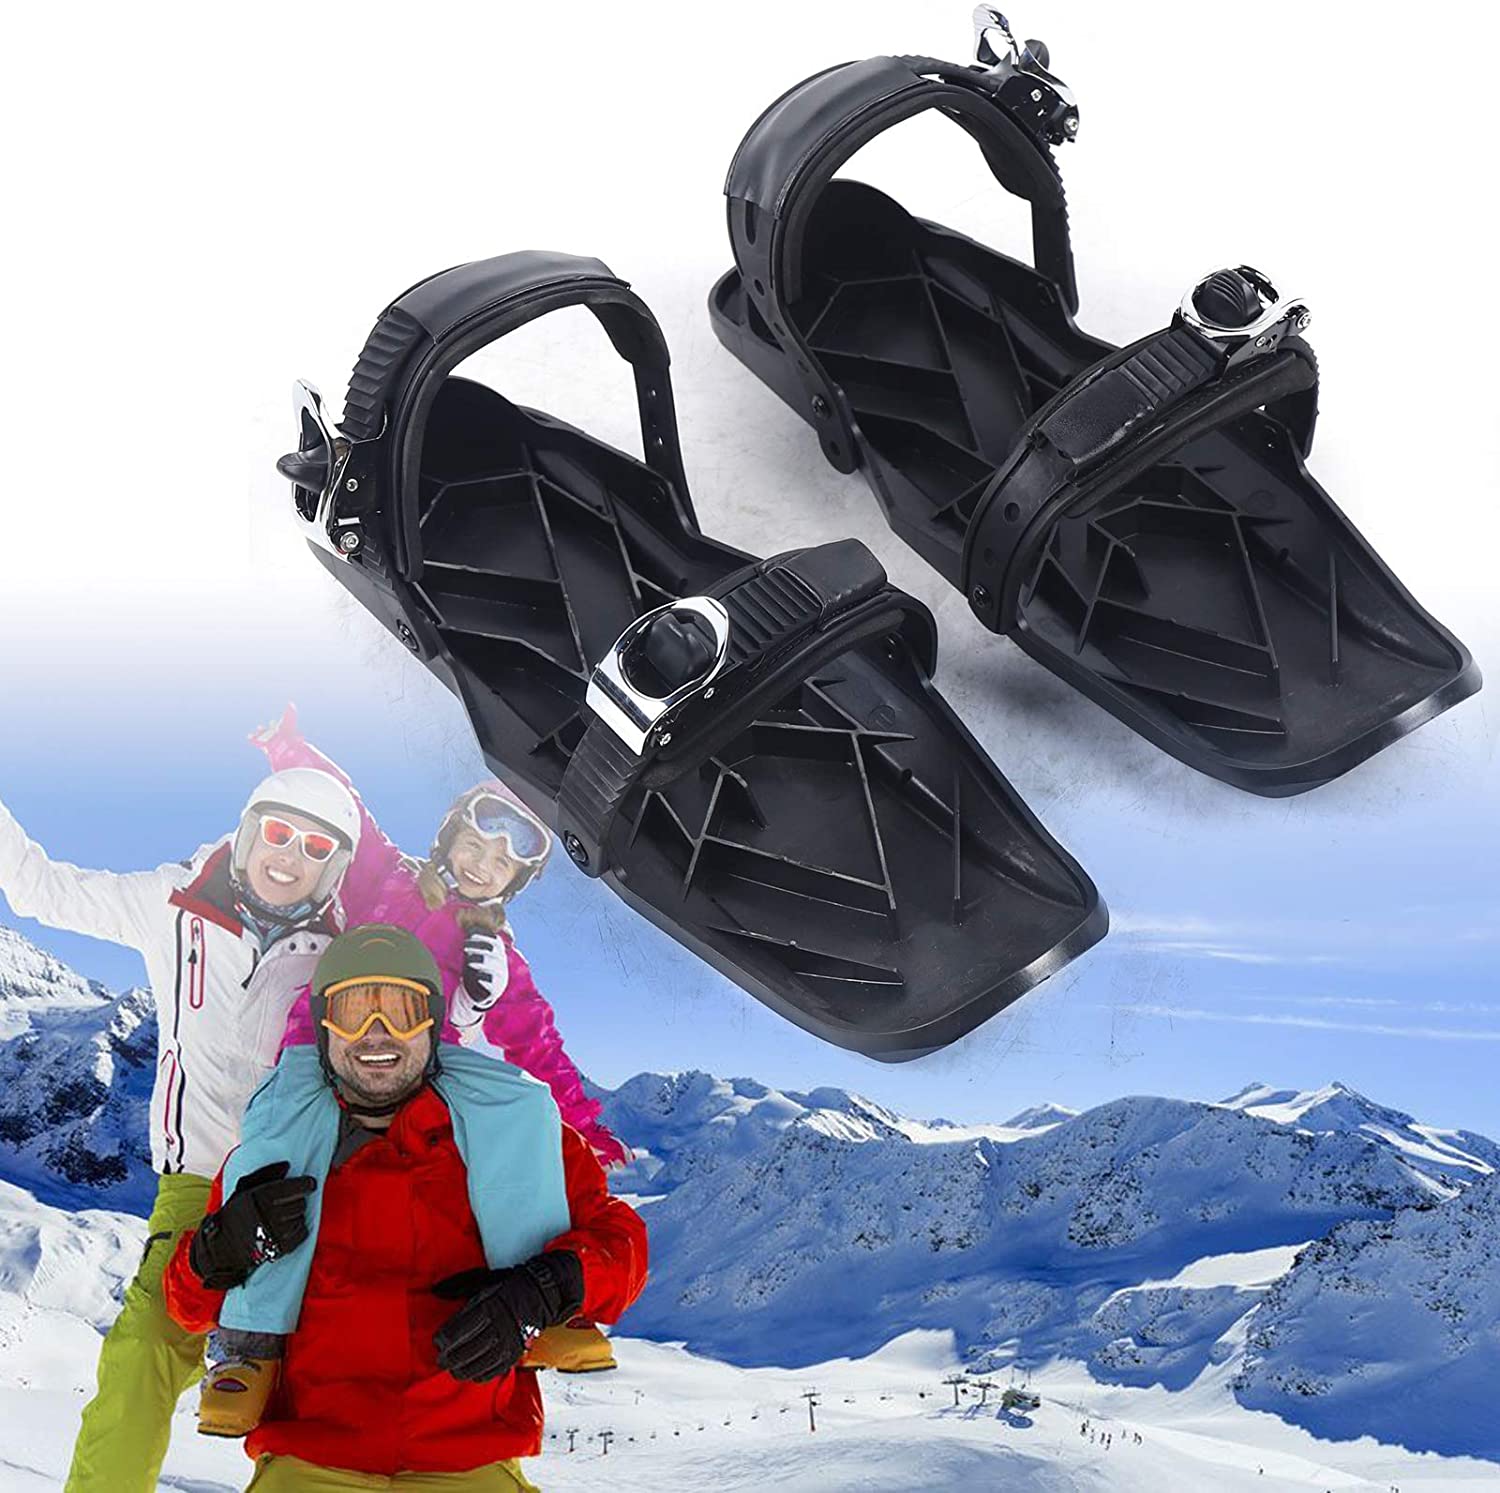 CNCEST Outdoor Portable Snowboard Light Weight Mini Sled Snow Board Ski Boots Ski Shoes Combine Skates with Skis for Women/Men Adults - image 1 of 5